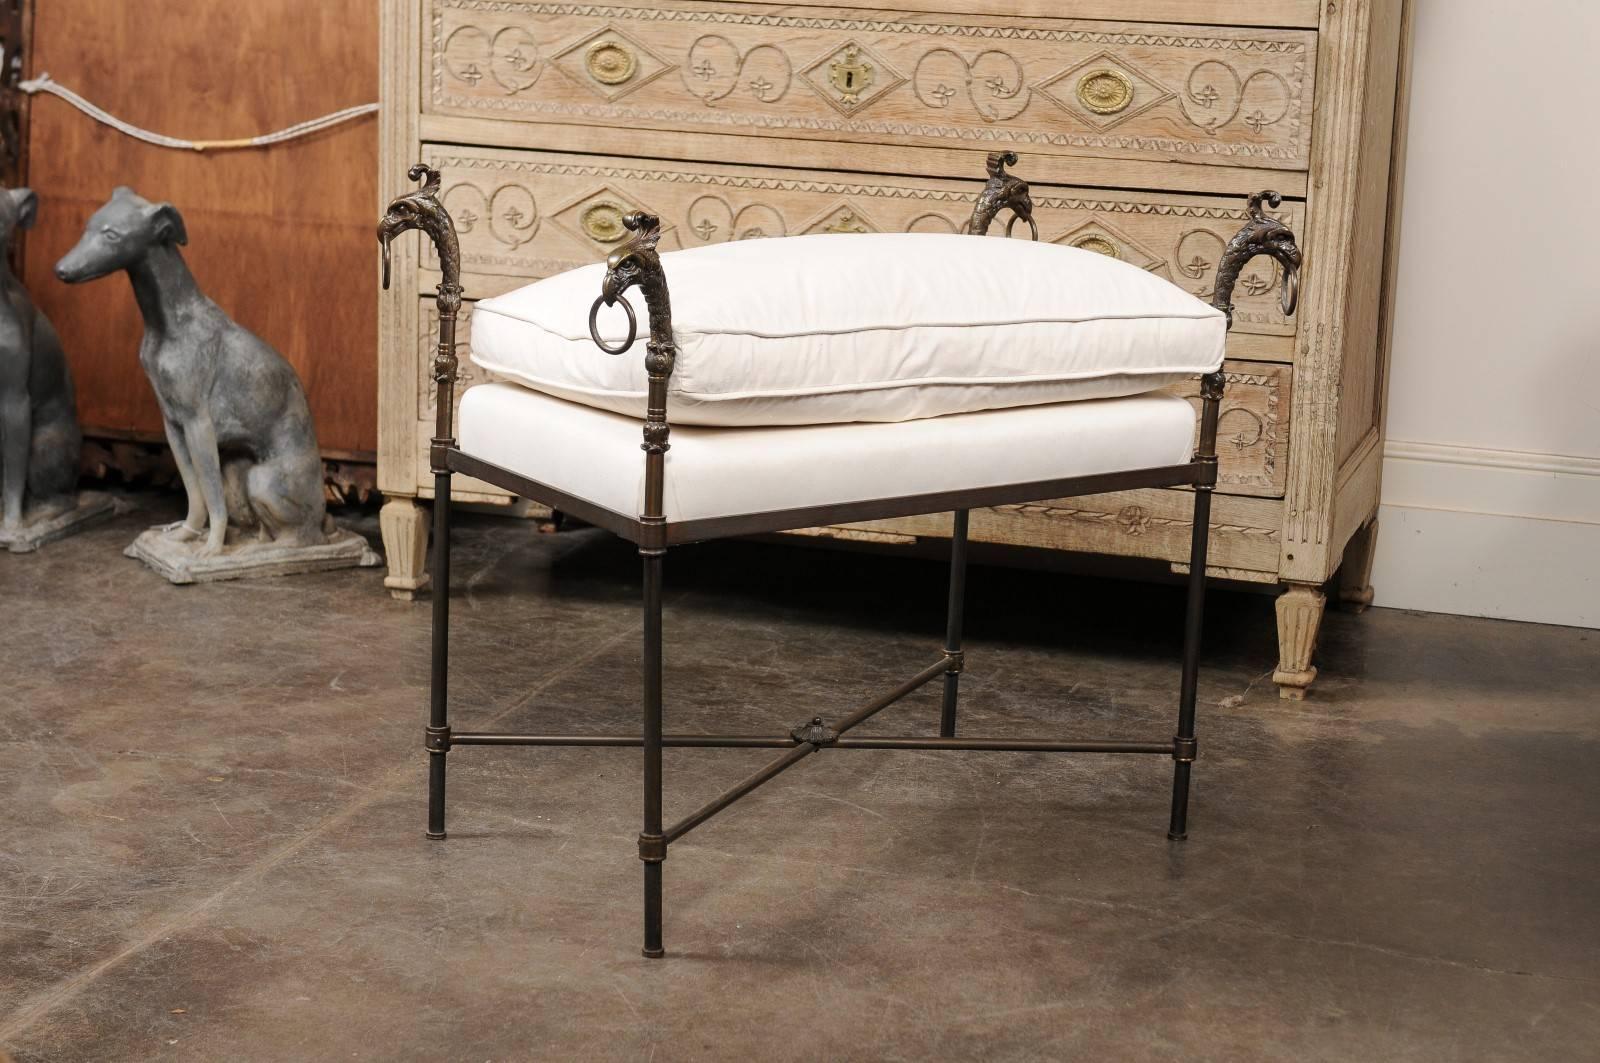 This French iron stool from the turn of the century (19th to 20th century) features a rectangular smooth muslin upholstered seat with comfy cushion, supported by four iron legs adorned in their upper section with exquisite bronze griffin heads with